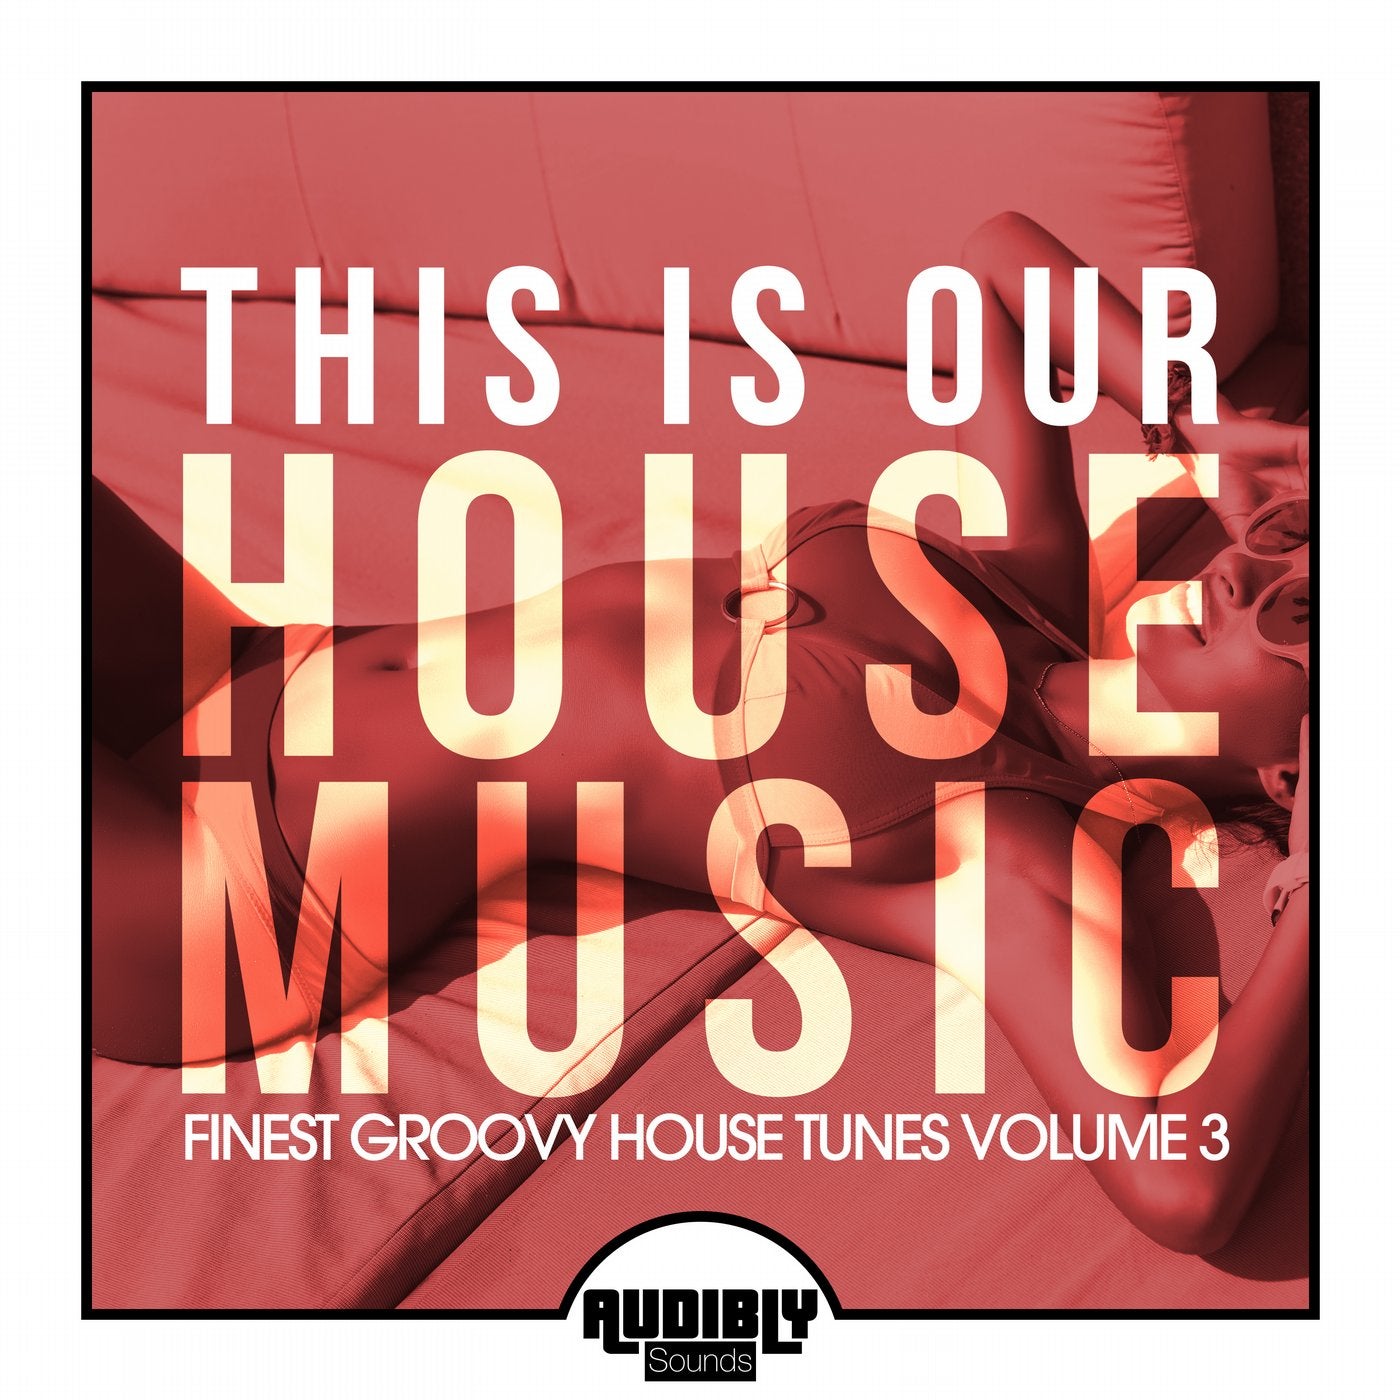 This Is Our House Music (Finest Groovy House Tunes, Vol. 3)